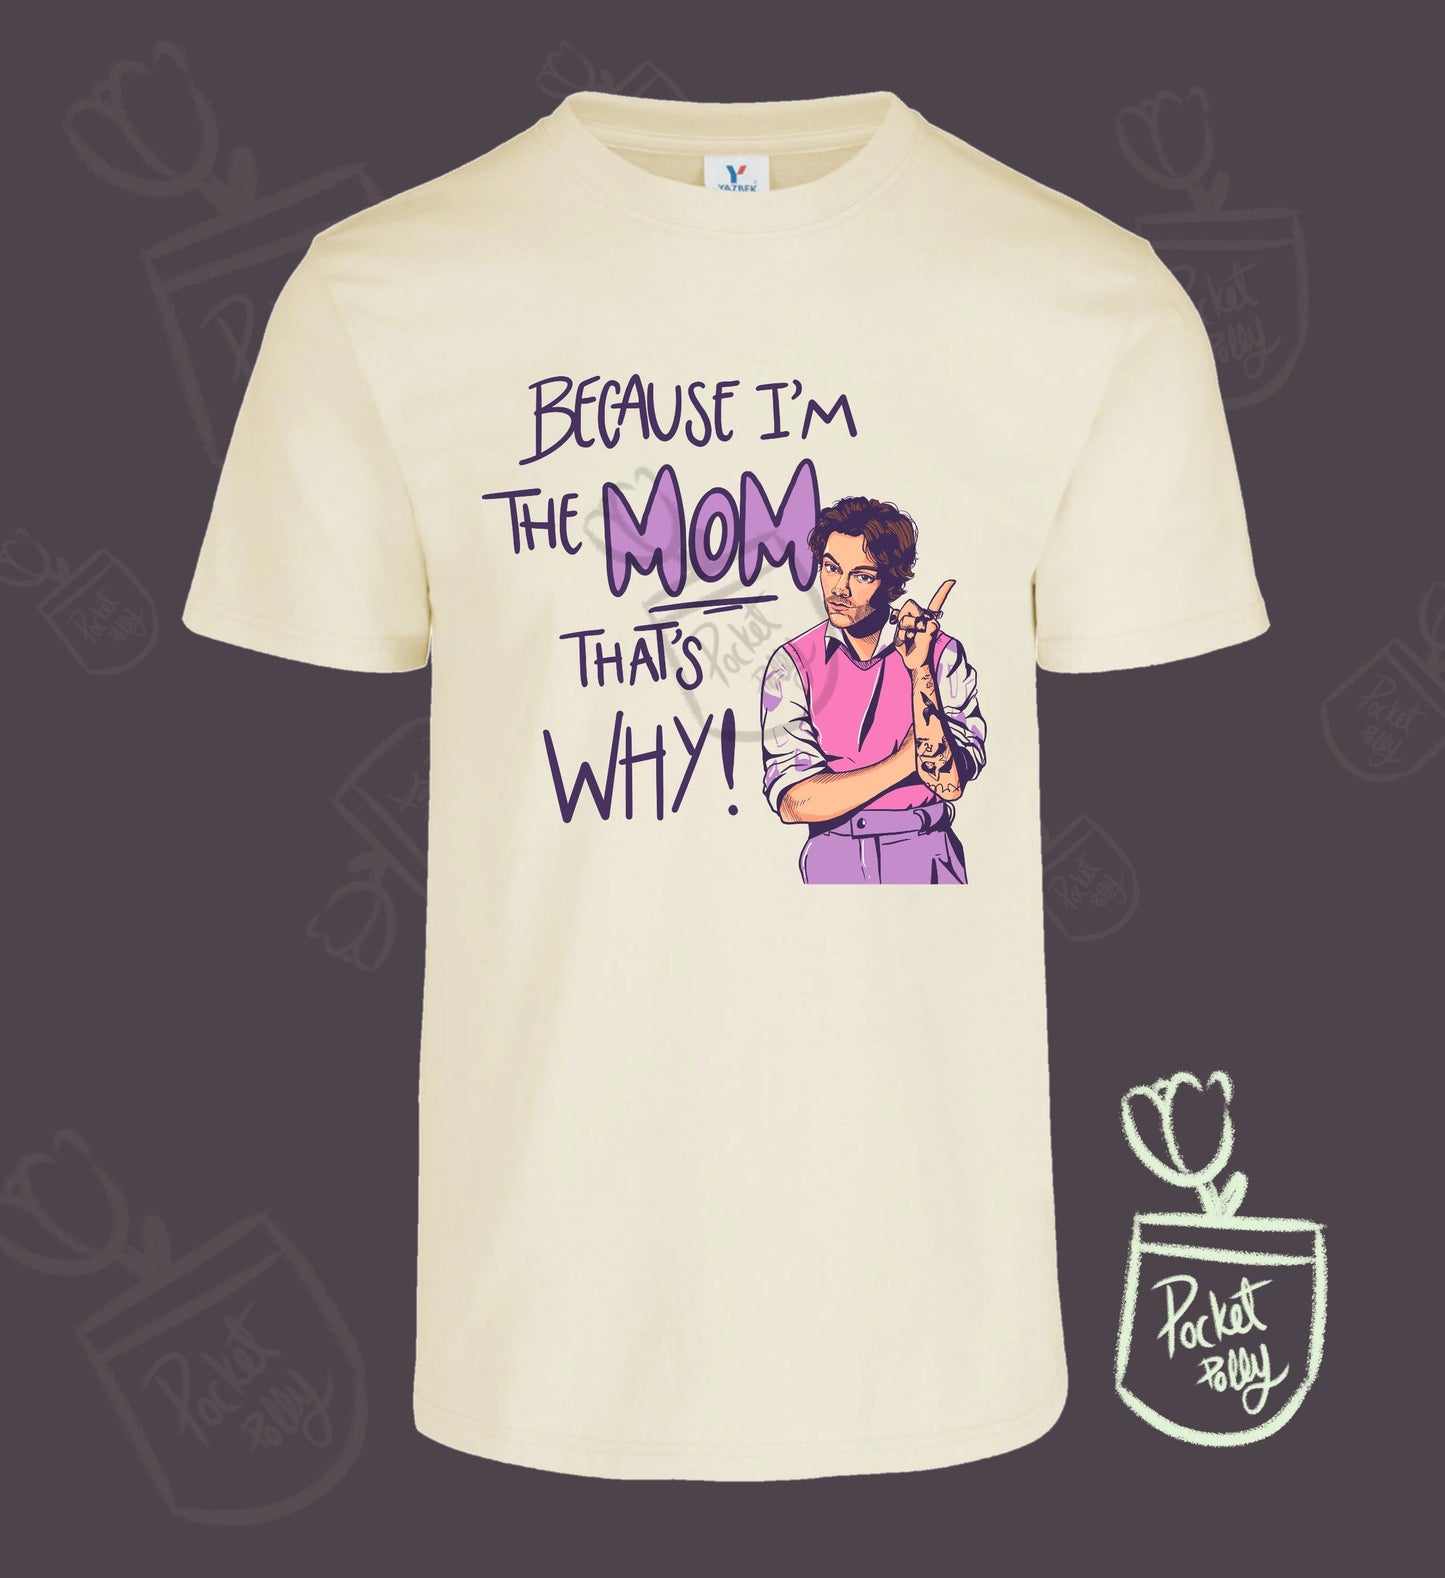 Momrry T-shirt Harry styles Because in the mom shirt